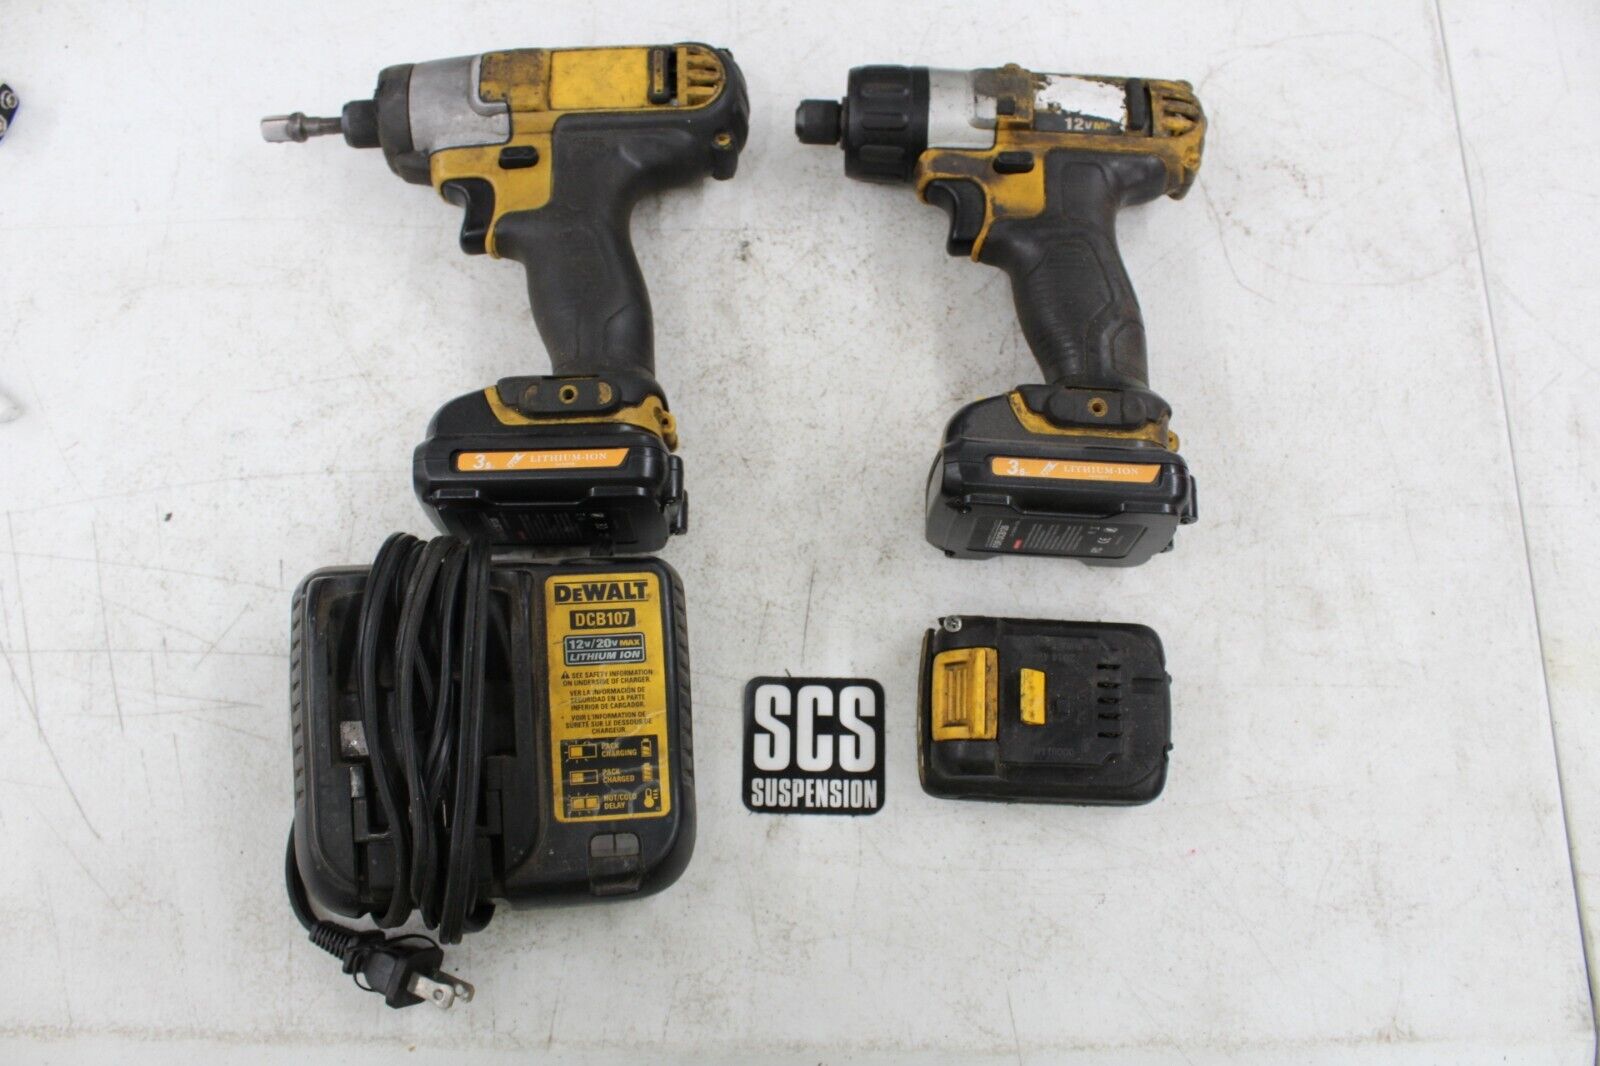 Dewalt 12V Max Impact + 1/4 Bit Driver with Charger + Batteries Lithium Ion USED